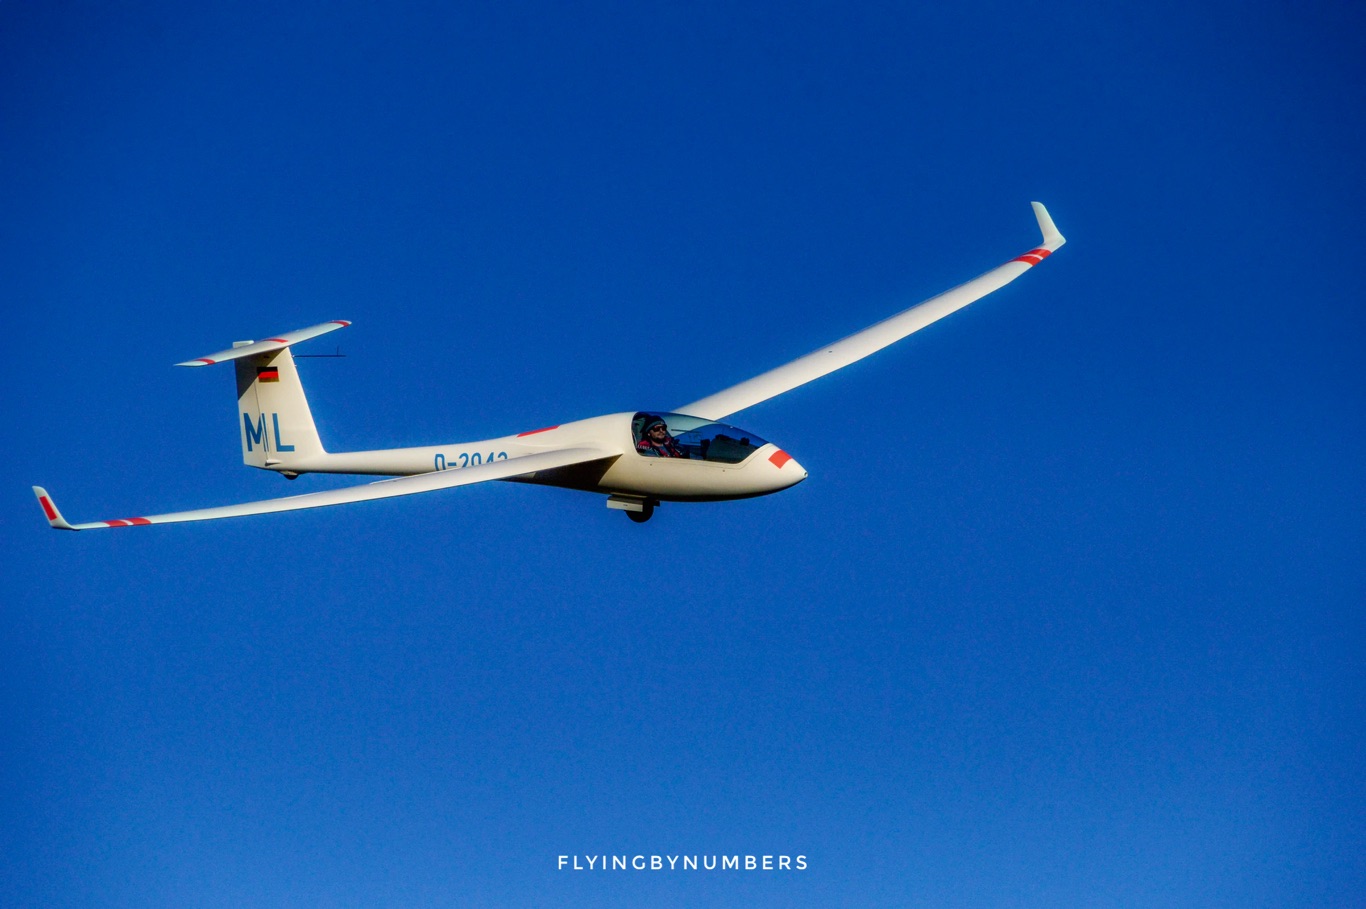 High performance gliders have air brakes too